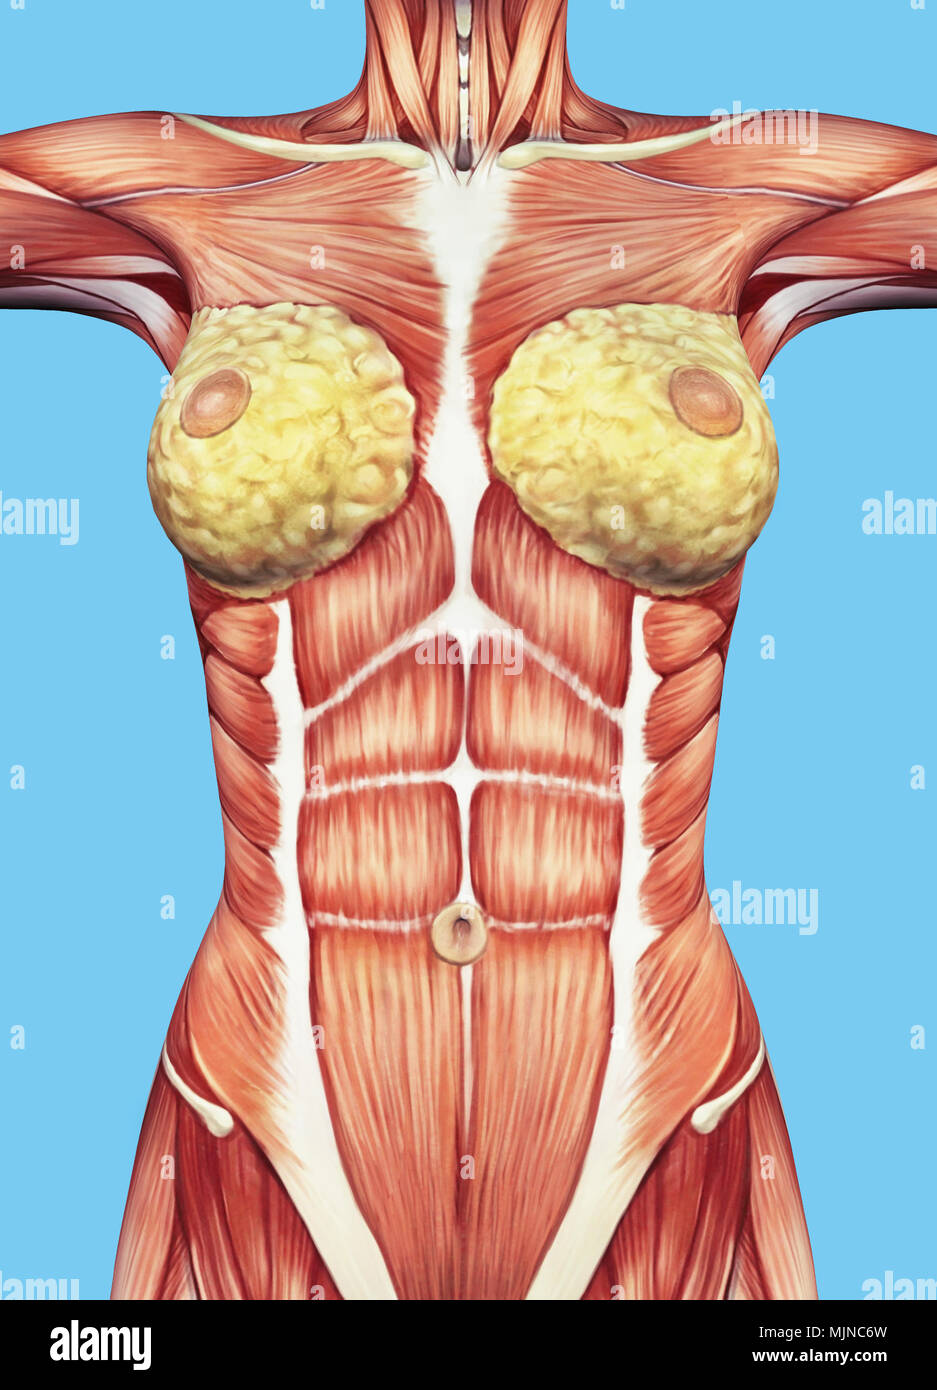 Anatomy of female chest and torso featuring major muscular groups